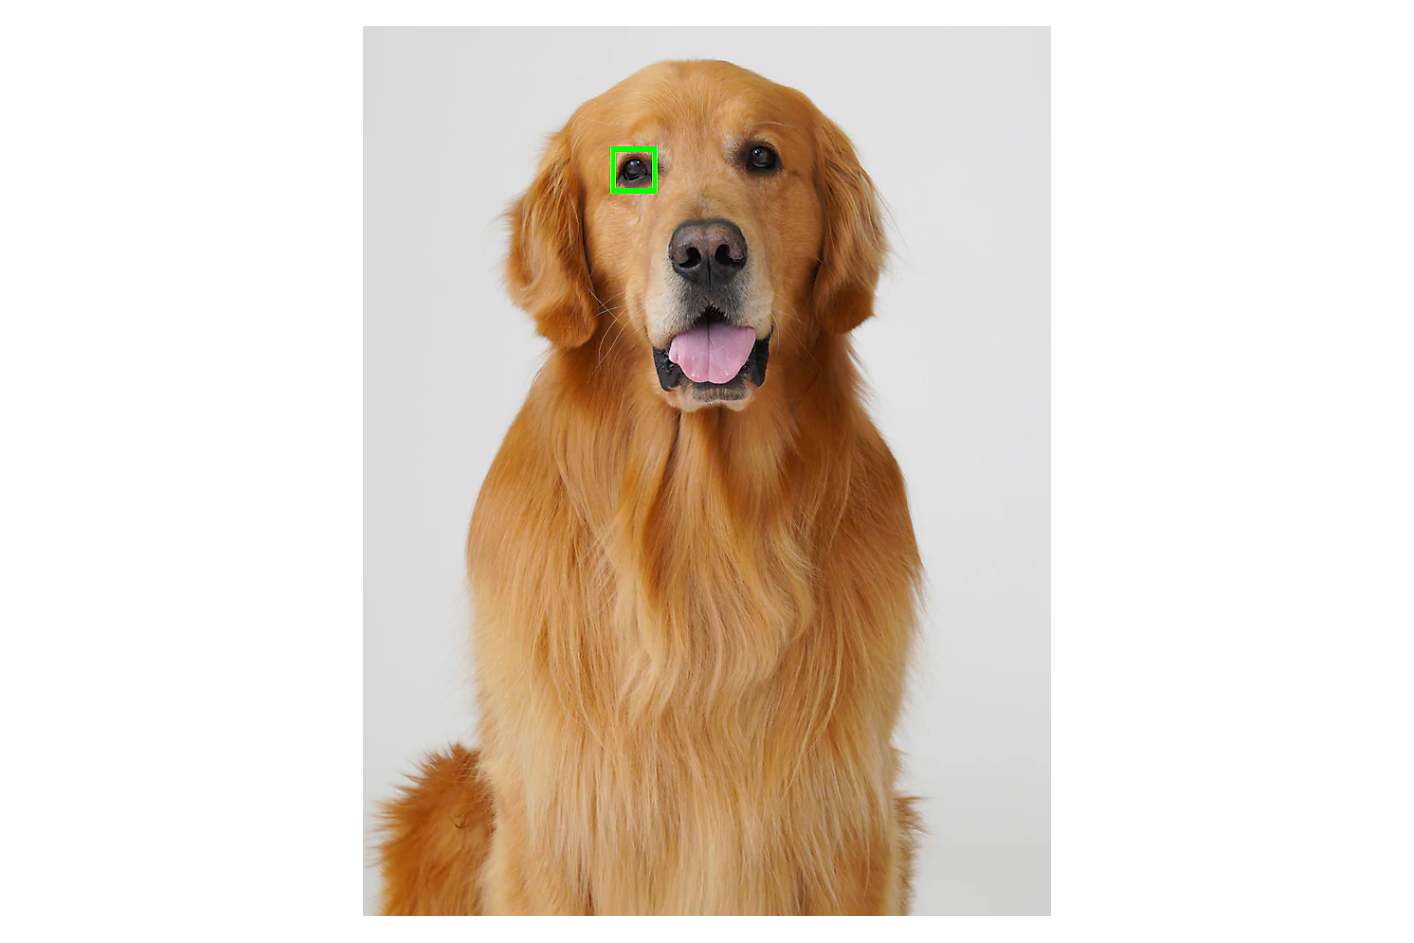 A golden retriever sits against a gray background with a green square framing one eye.